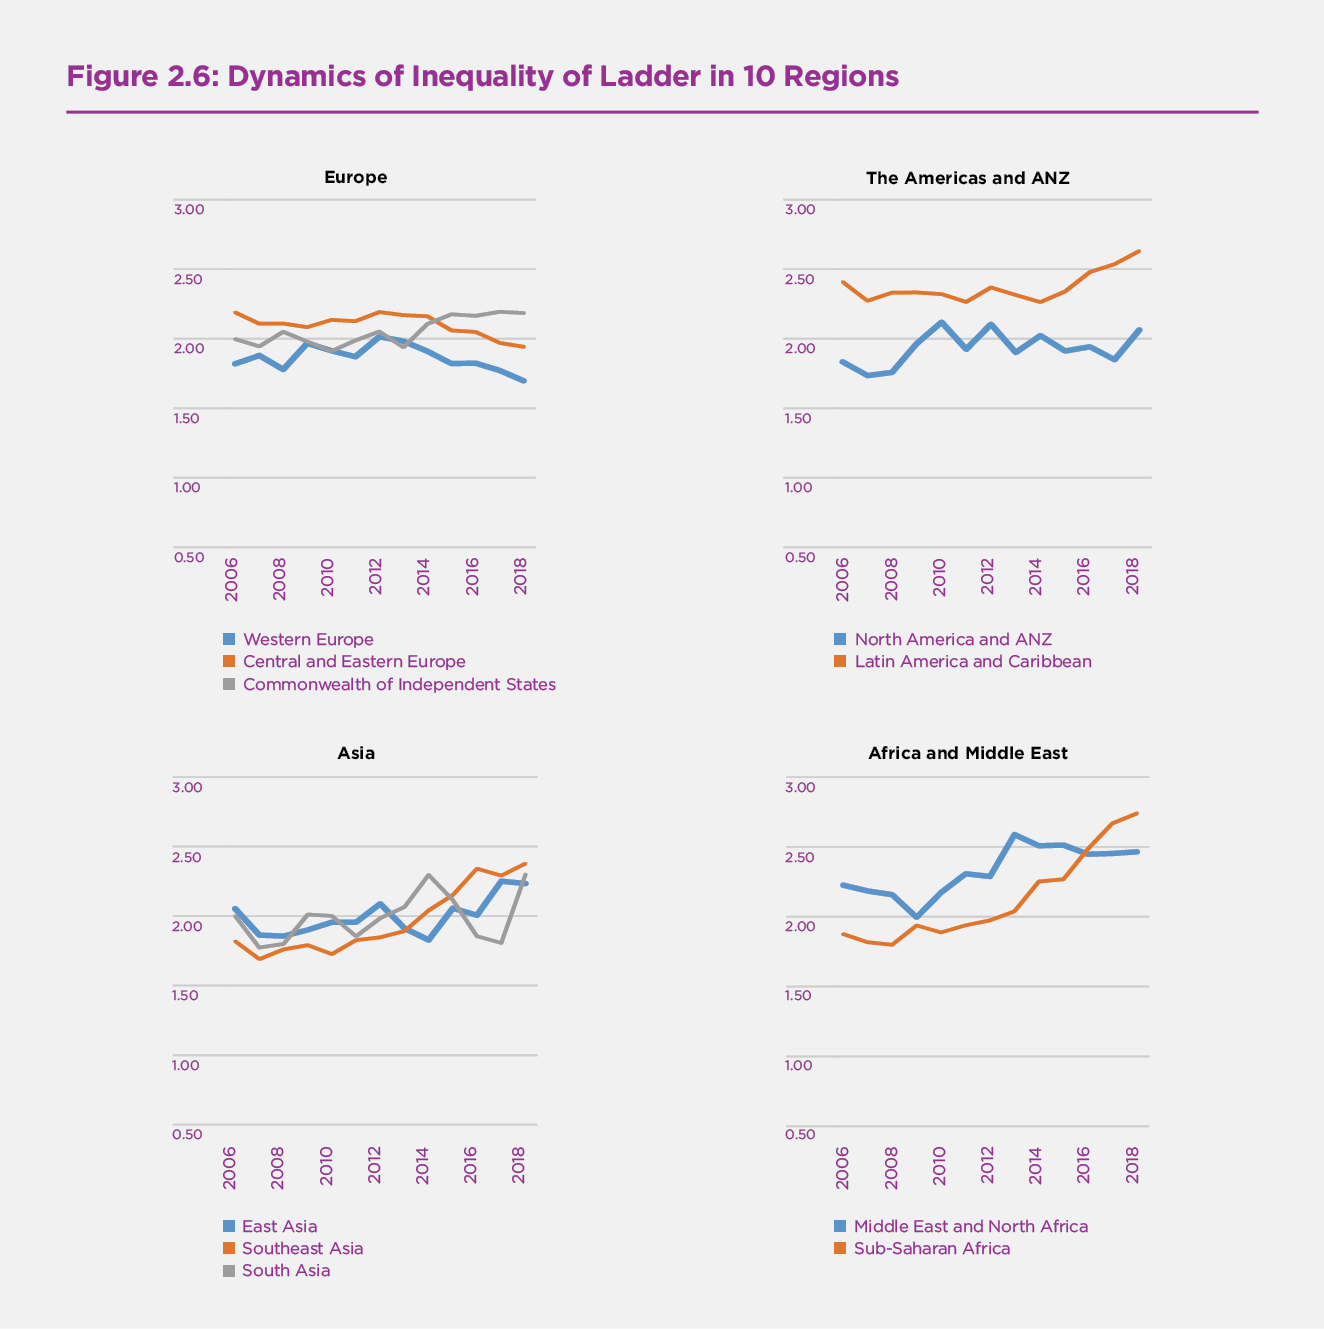 Figure 2.6 Dynamics of Inequality of Ladder in 10 Regions